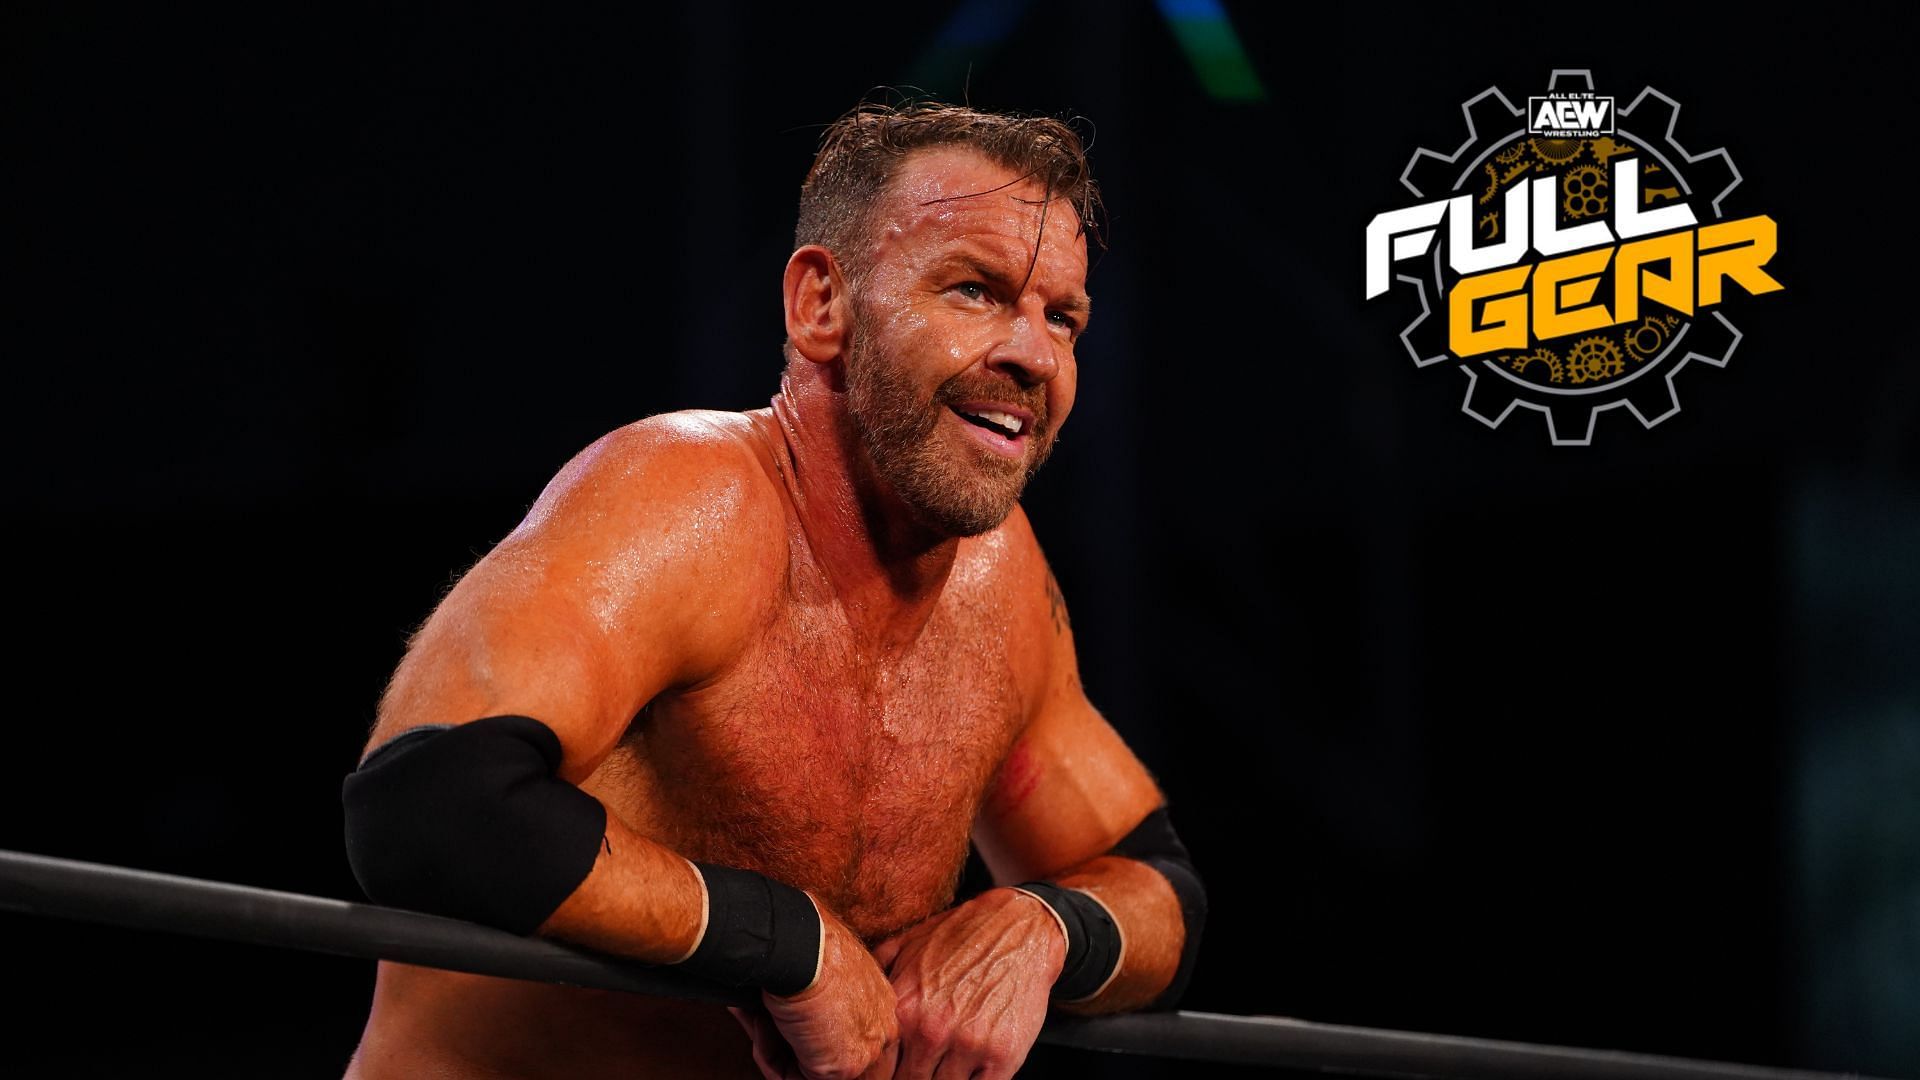 Christian Cage had a big moment at Full Gear